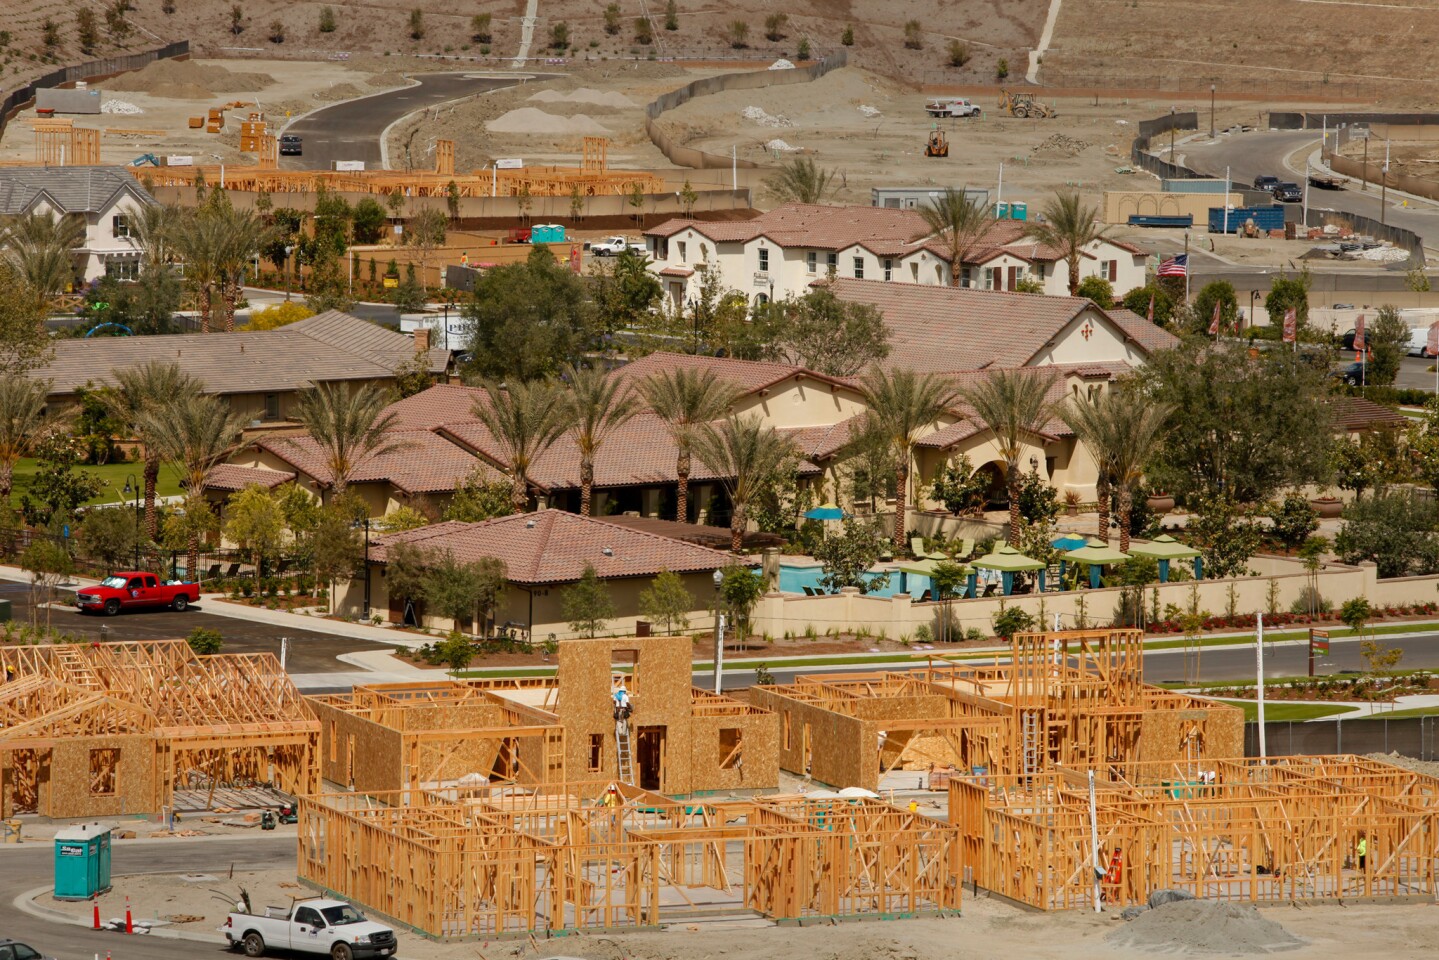 The "village" of Sendero, the first leg of the Rancho Mission Viejo development near San Juan Capistrano, will total about a thousand new homes on 690 acres when finished. Developers expect 14,000 homes will go up in this massive, master-planned community over the next two decades.